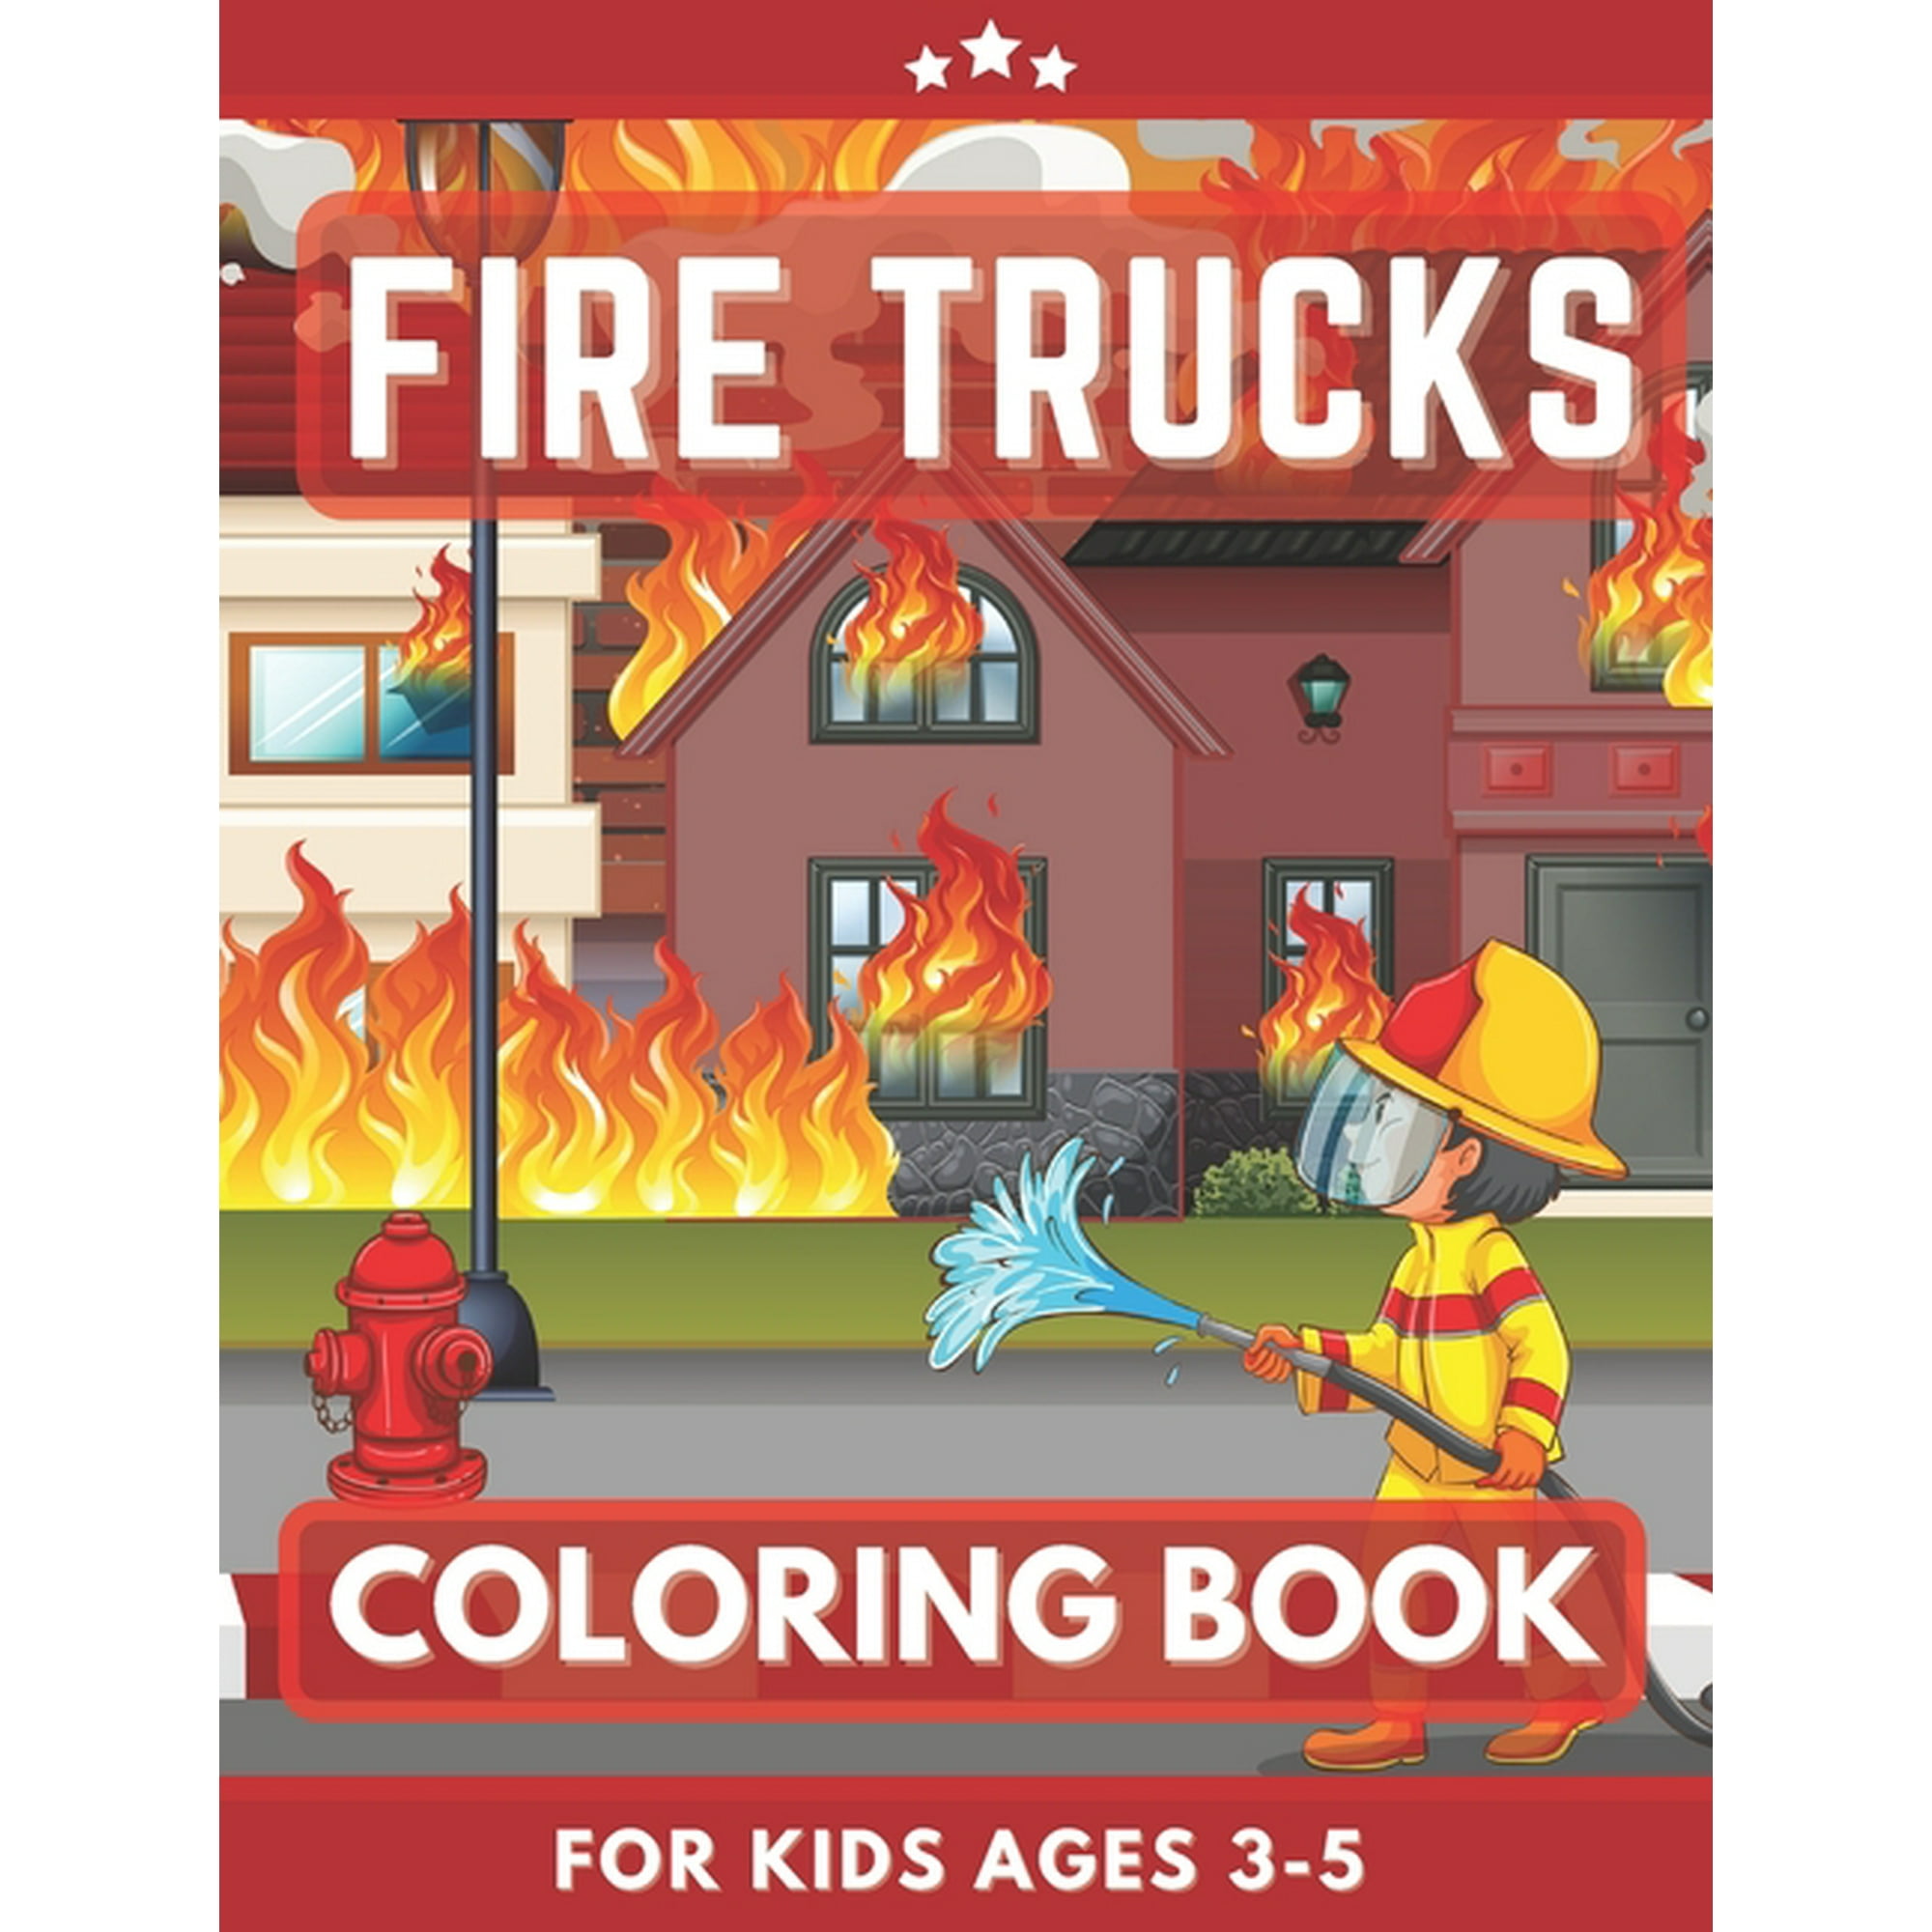 girl firefighter coloring page